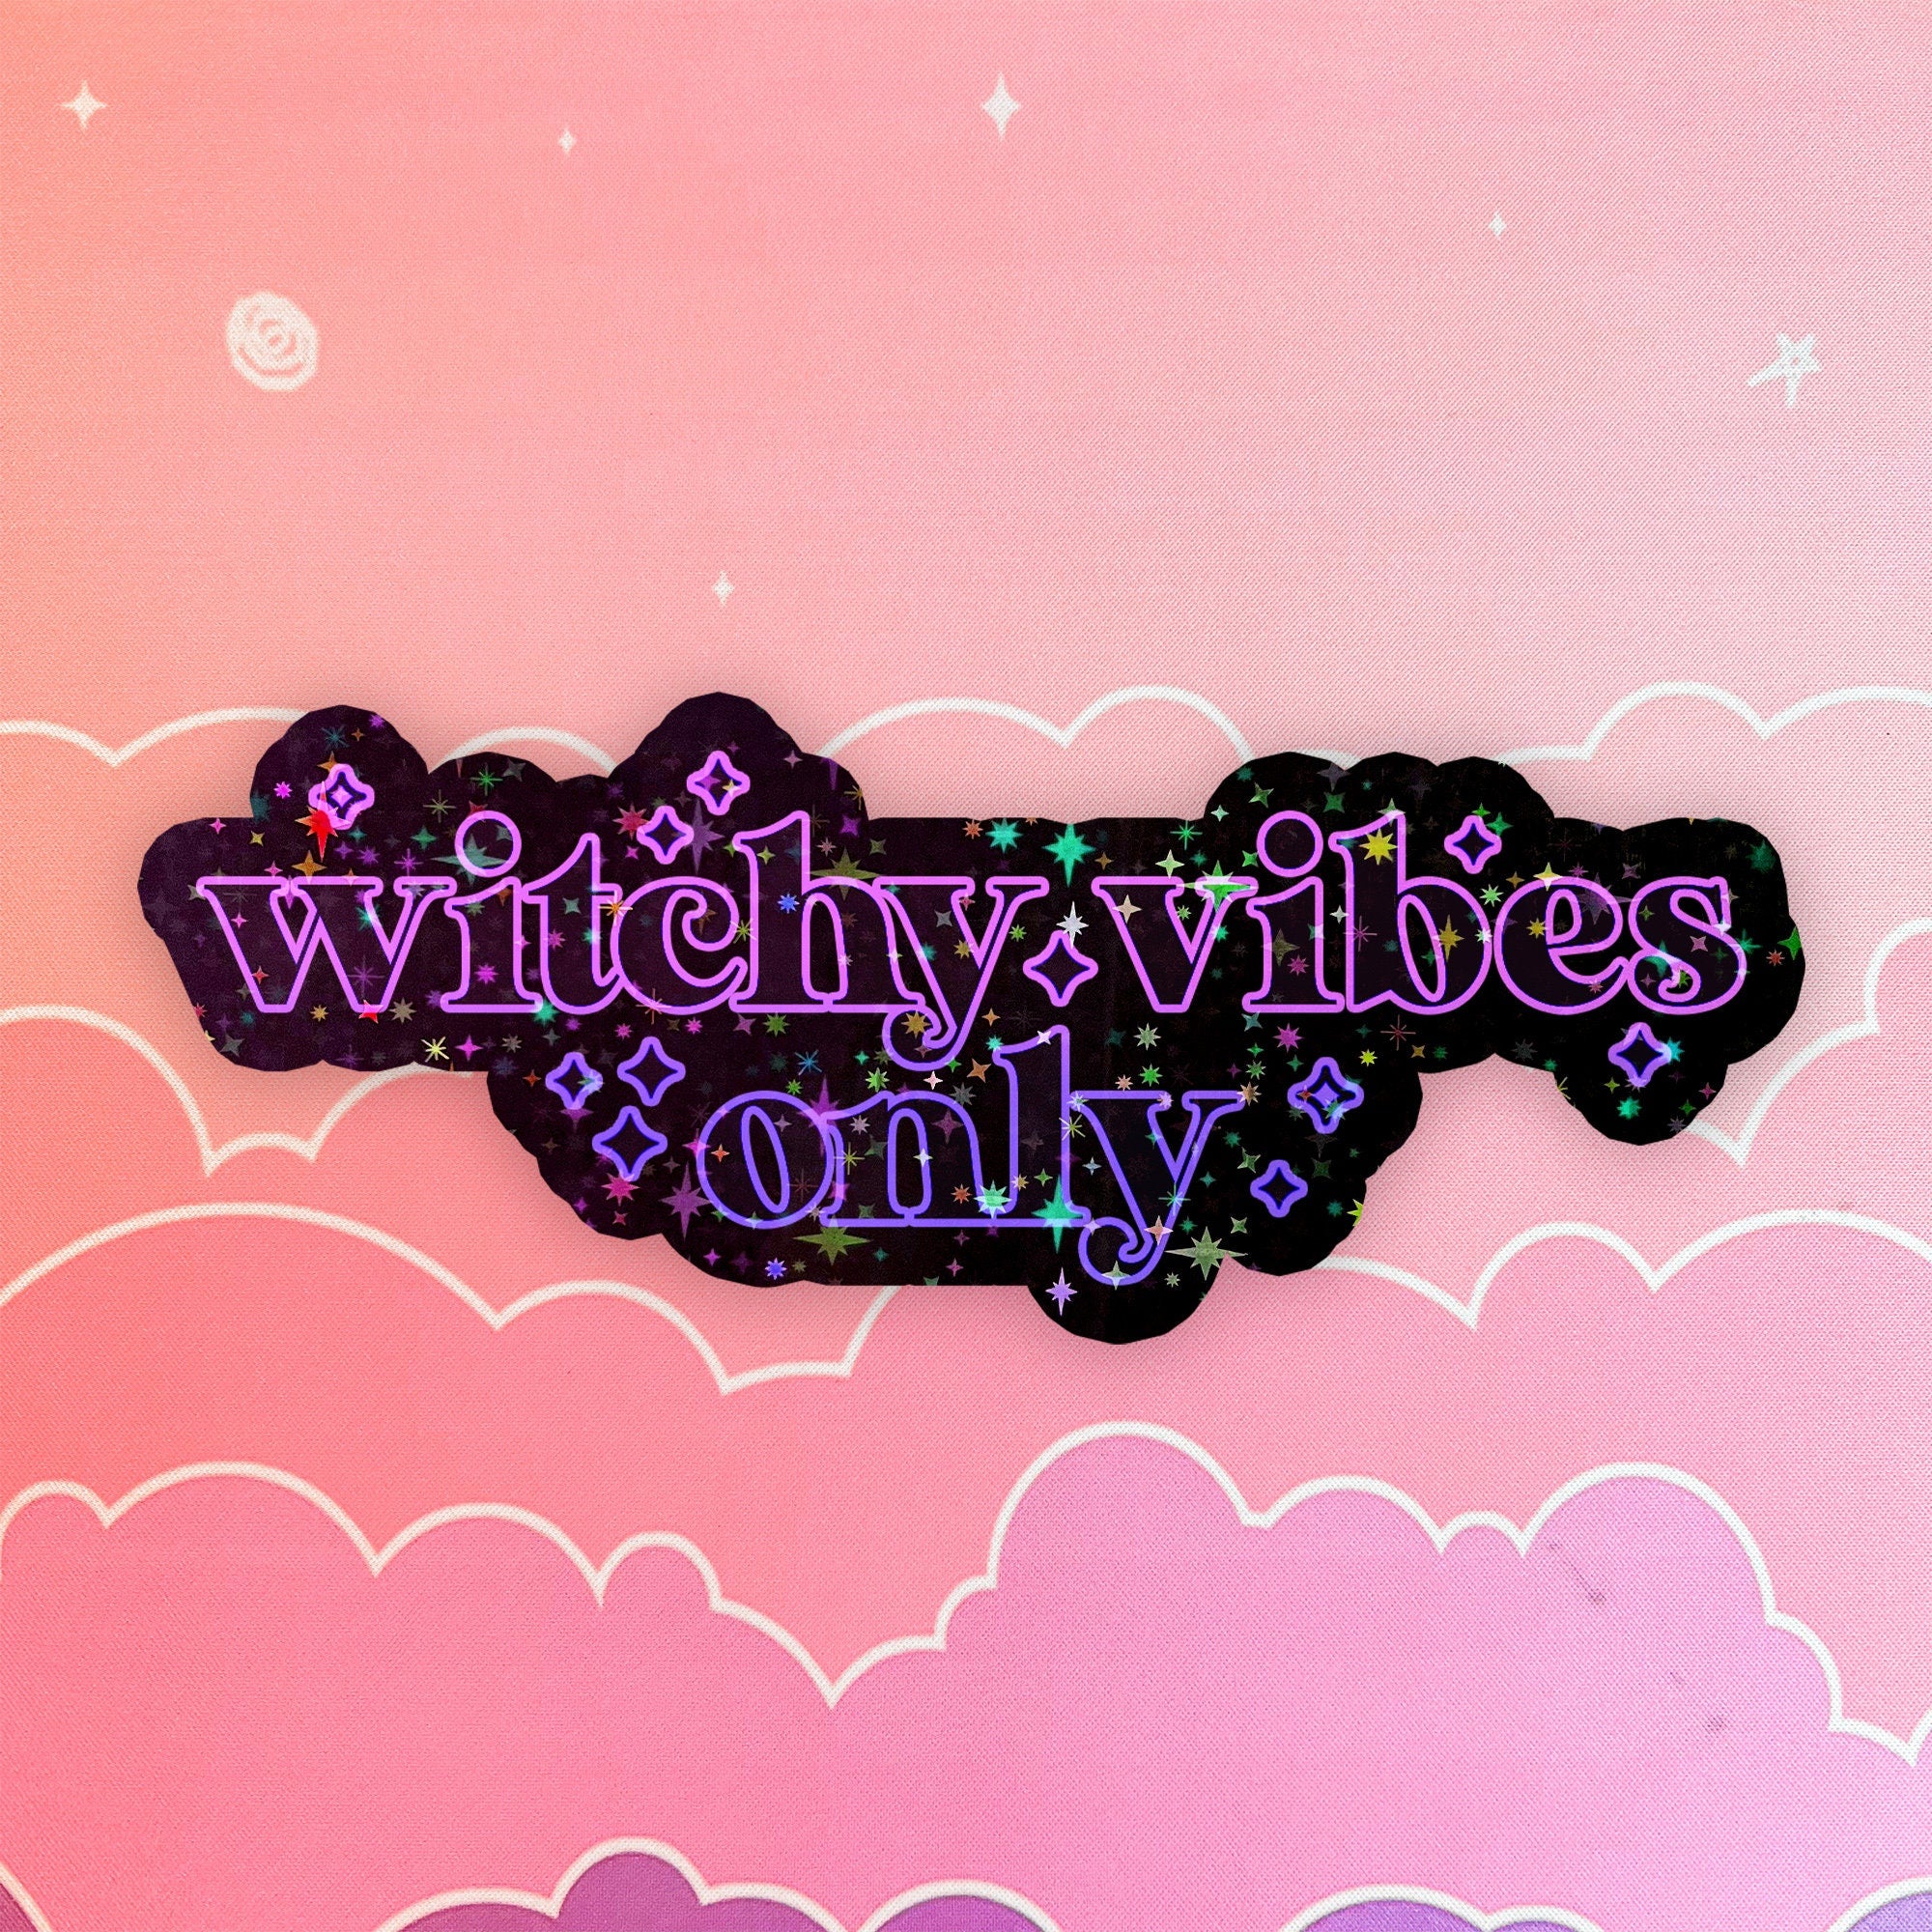 Witchy Vibes Only Sticker Halloween Aesthetic Laptop Stickers, Stationary Spooky Girly Cute Goth Kindle Stickers Hydroflask, Kawaii